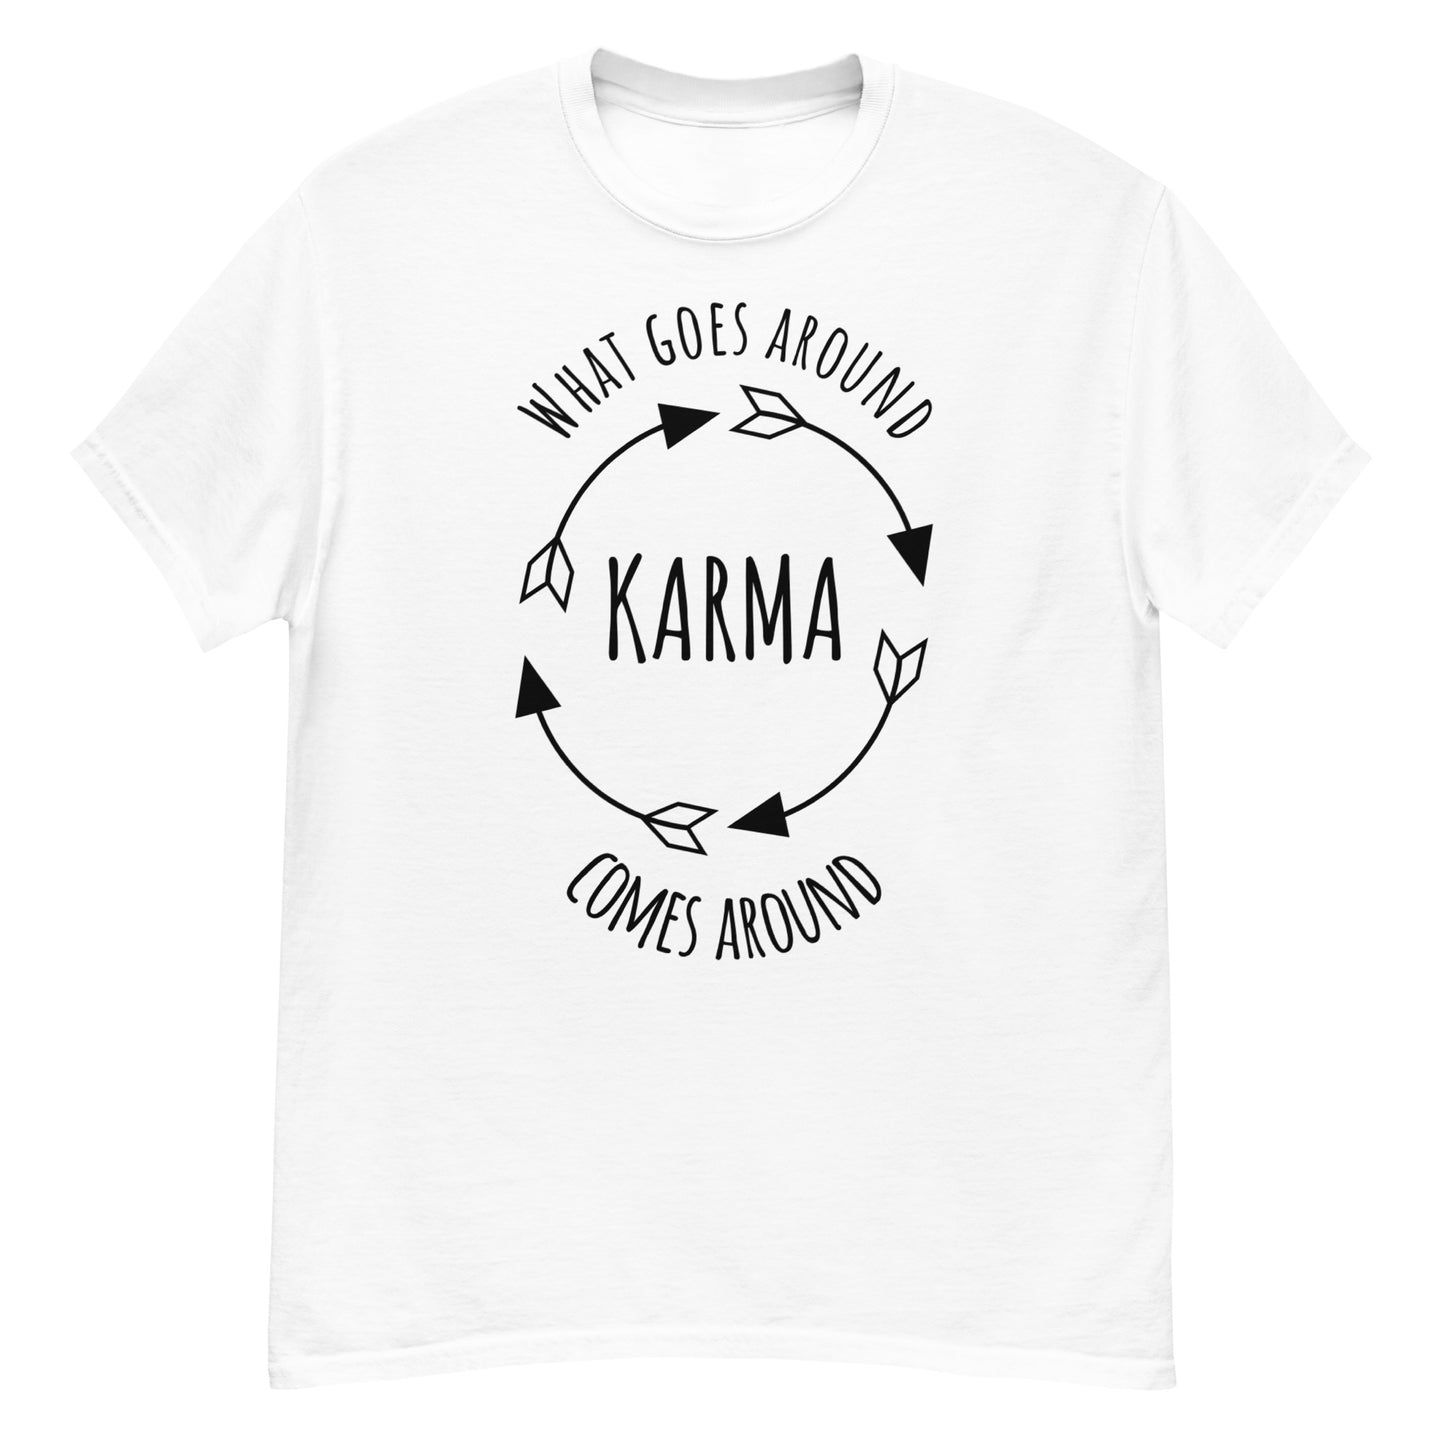 KARMA - what goes around come around - classic tee (black lettering)